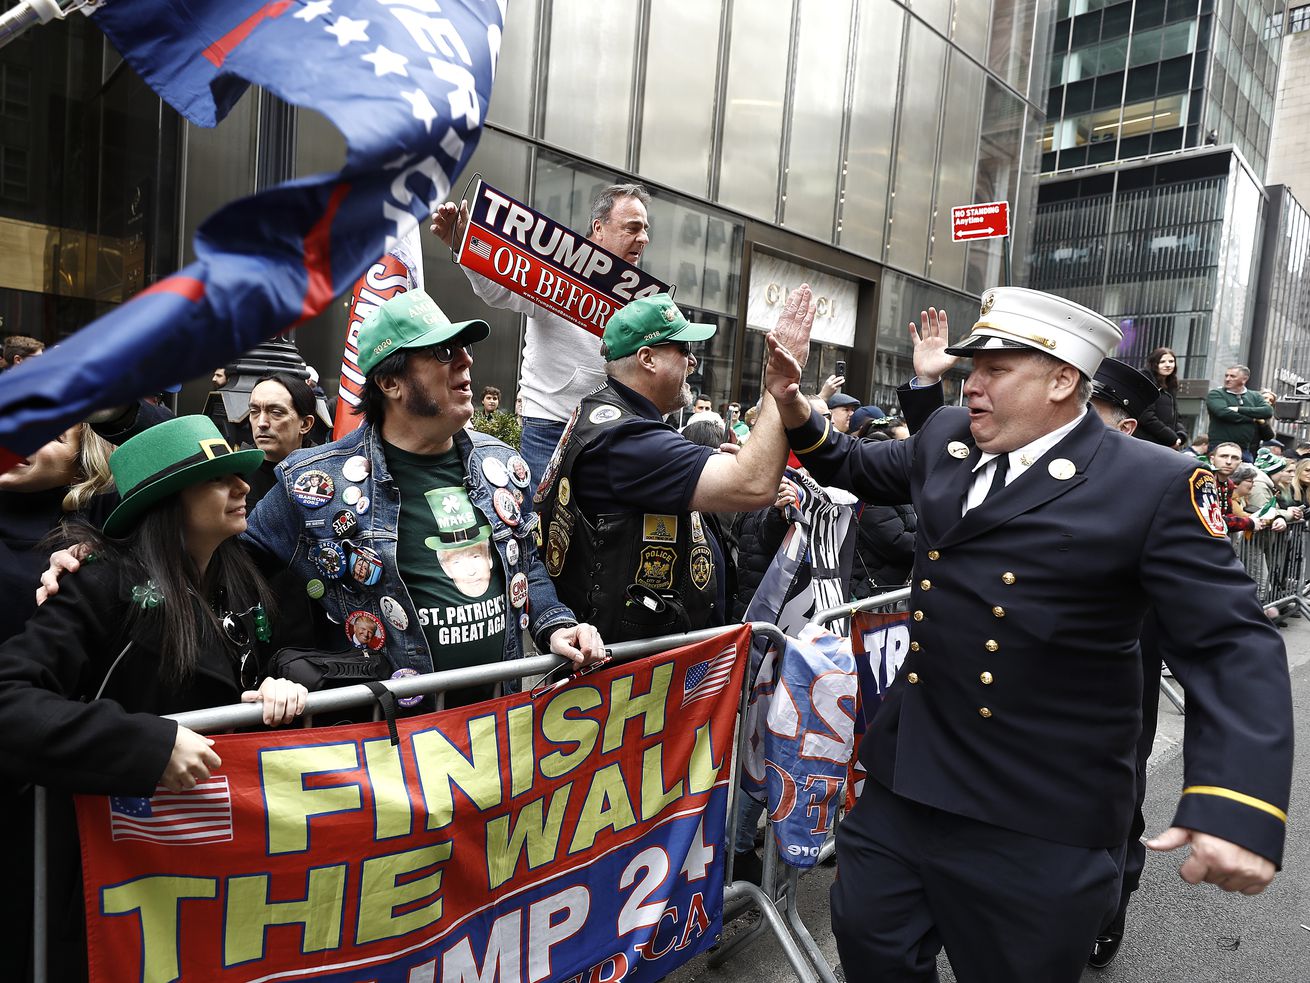 A handful of Trump supporters stand behind crowd barricades at the St. Patrick’s Day Parade on 5th Ave. in Manhattan.